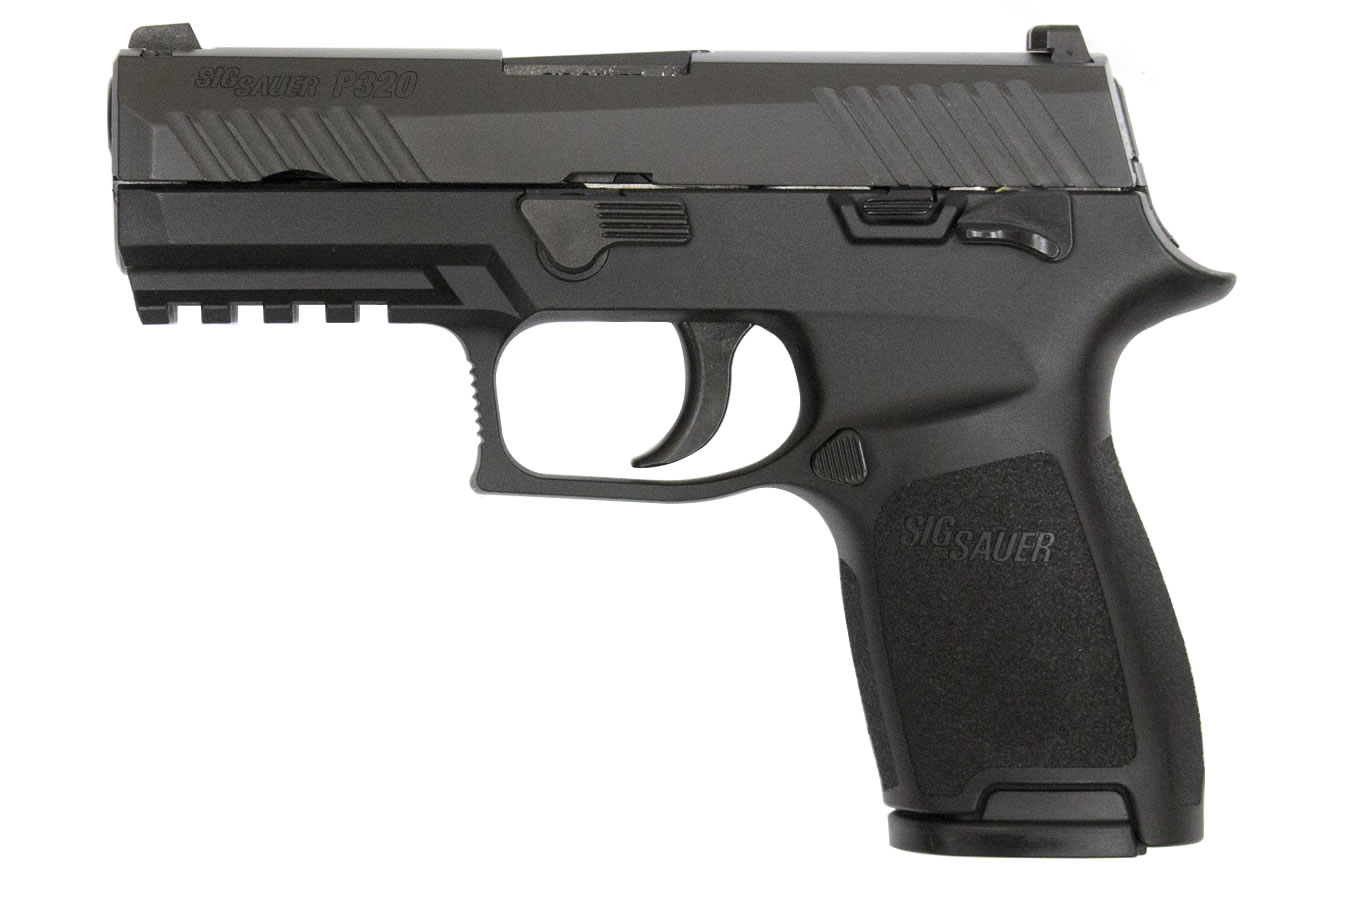 sig-sauer-p320-compact-9mm-striker-fired-pistol-with-night-sights-and